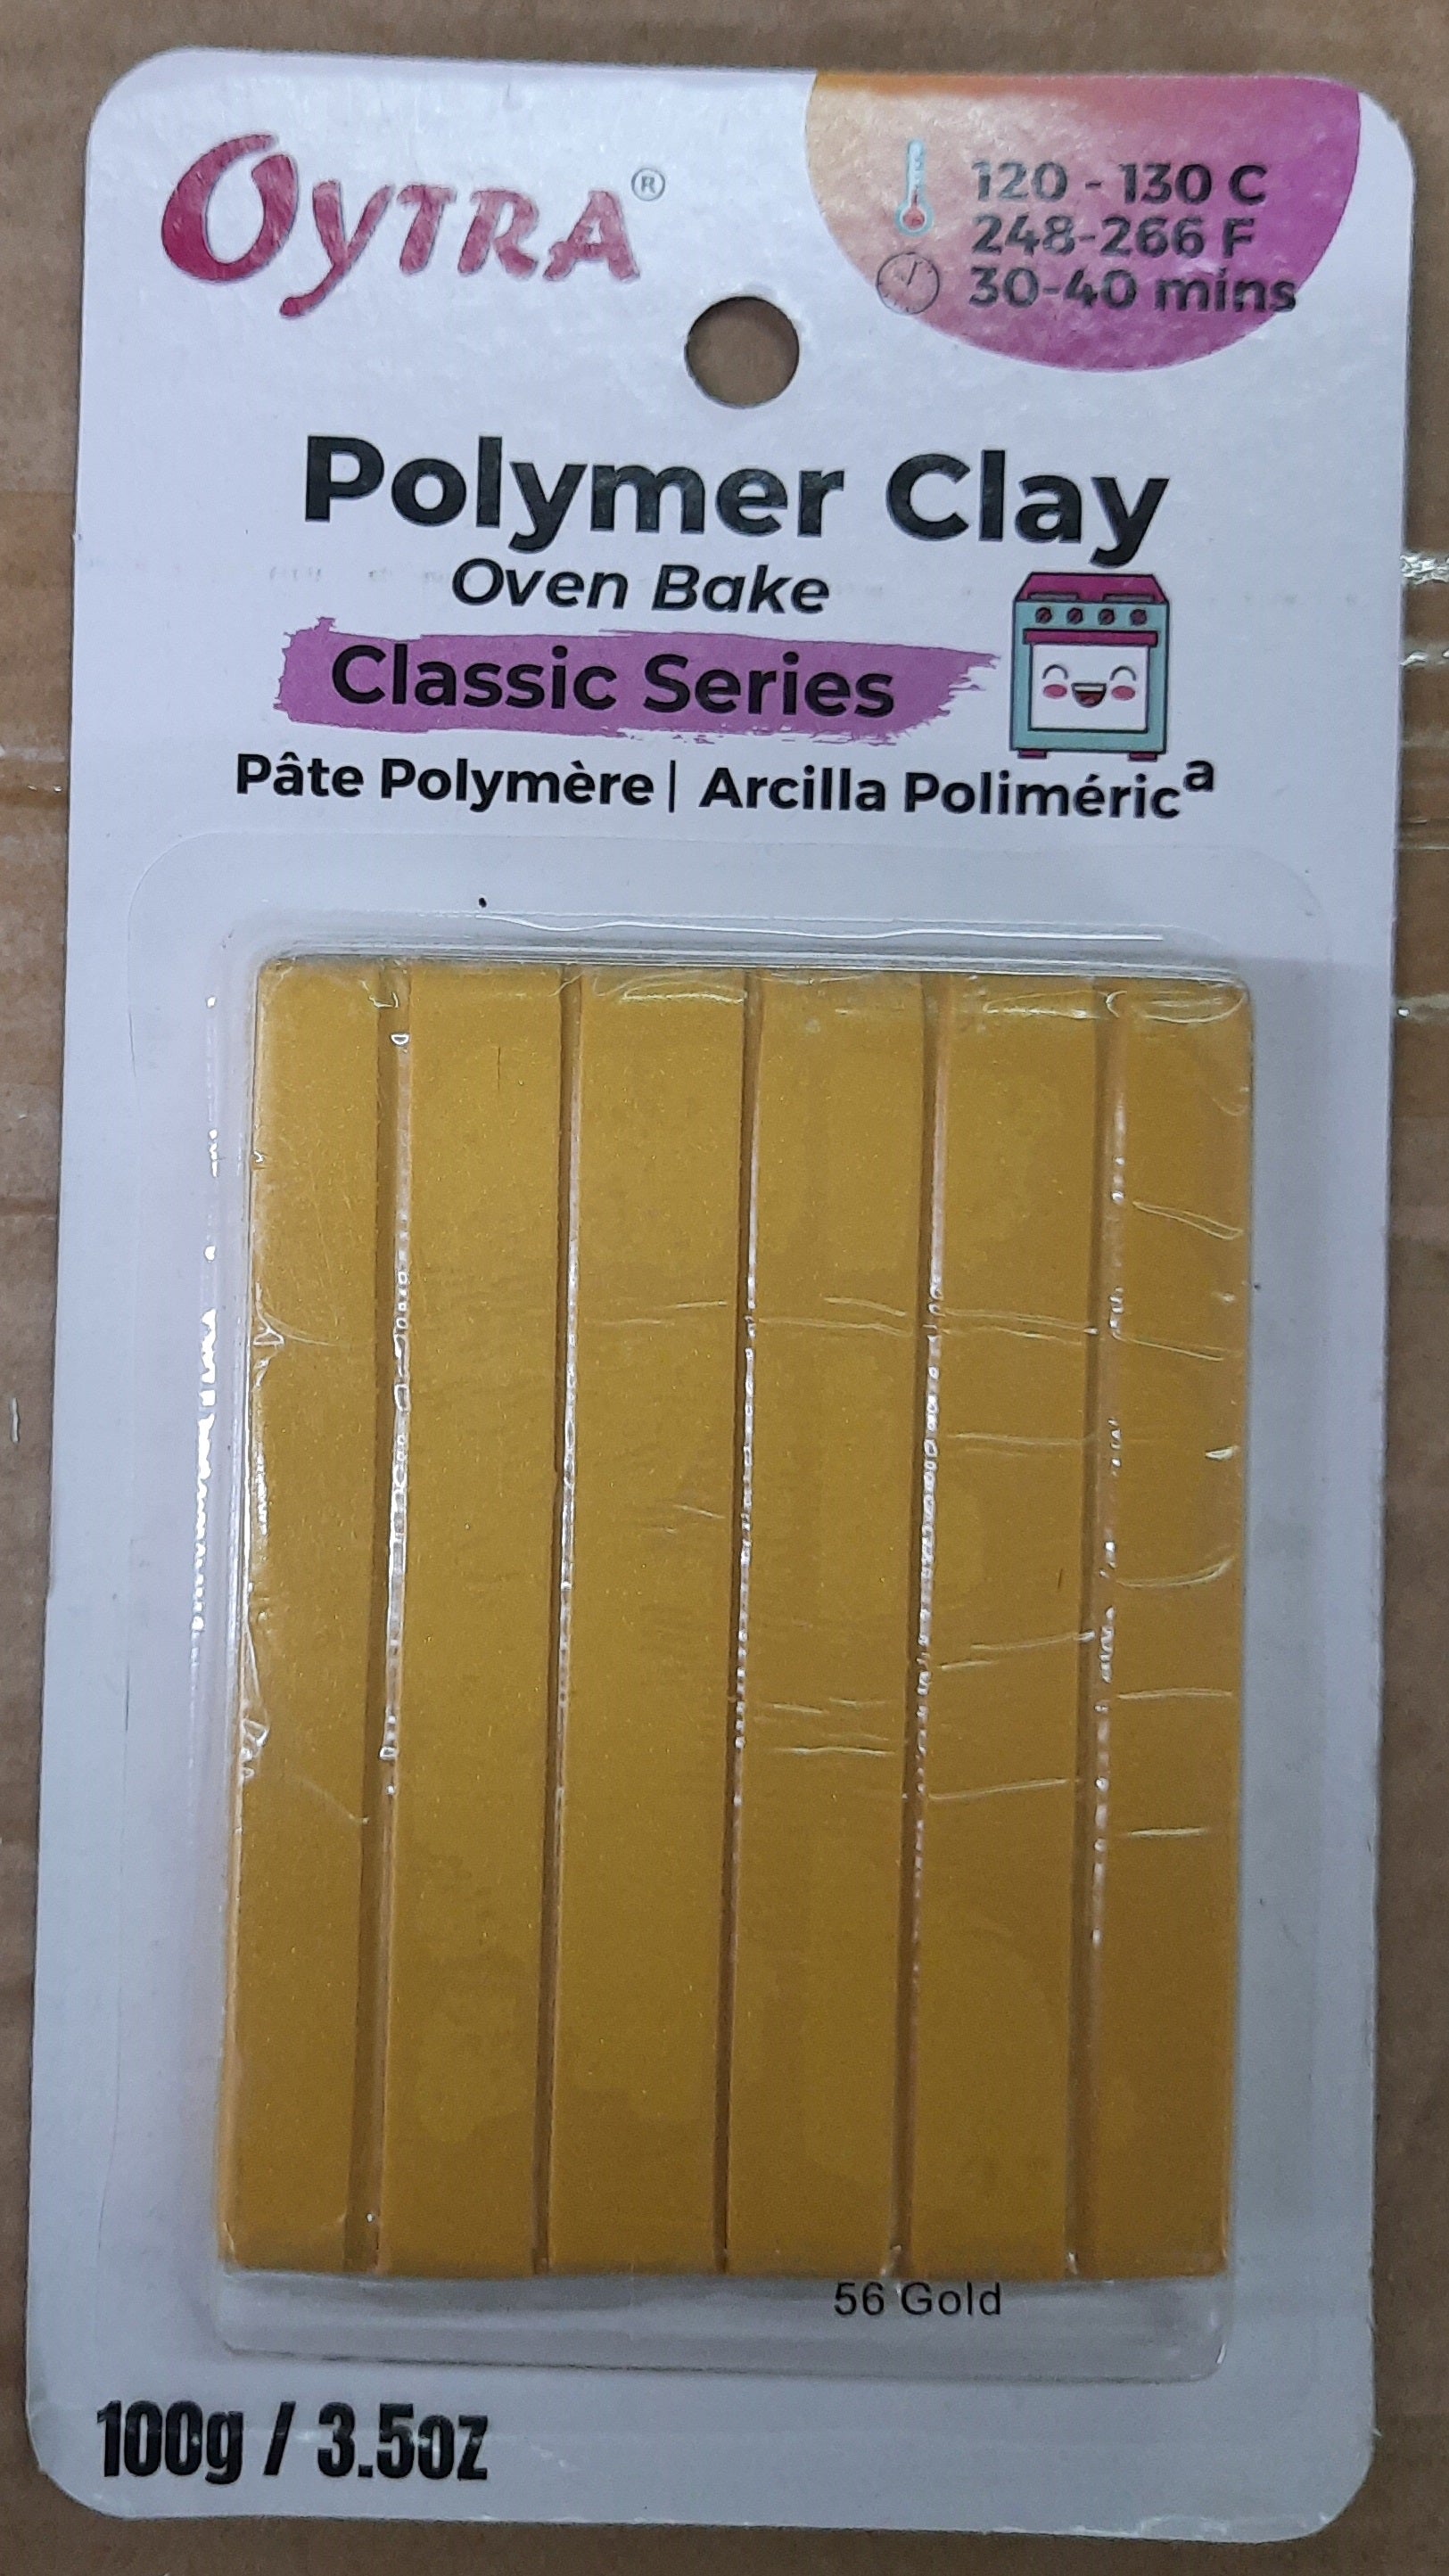 Golden Polymer Clay Oven Bake Classic Series Gold 56 - Oytra